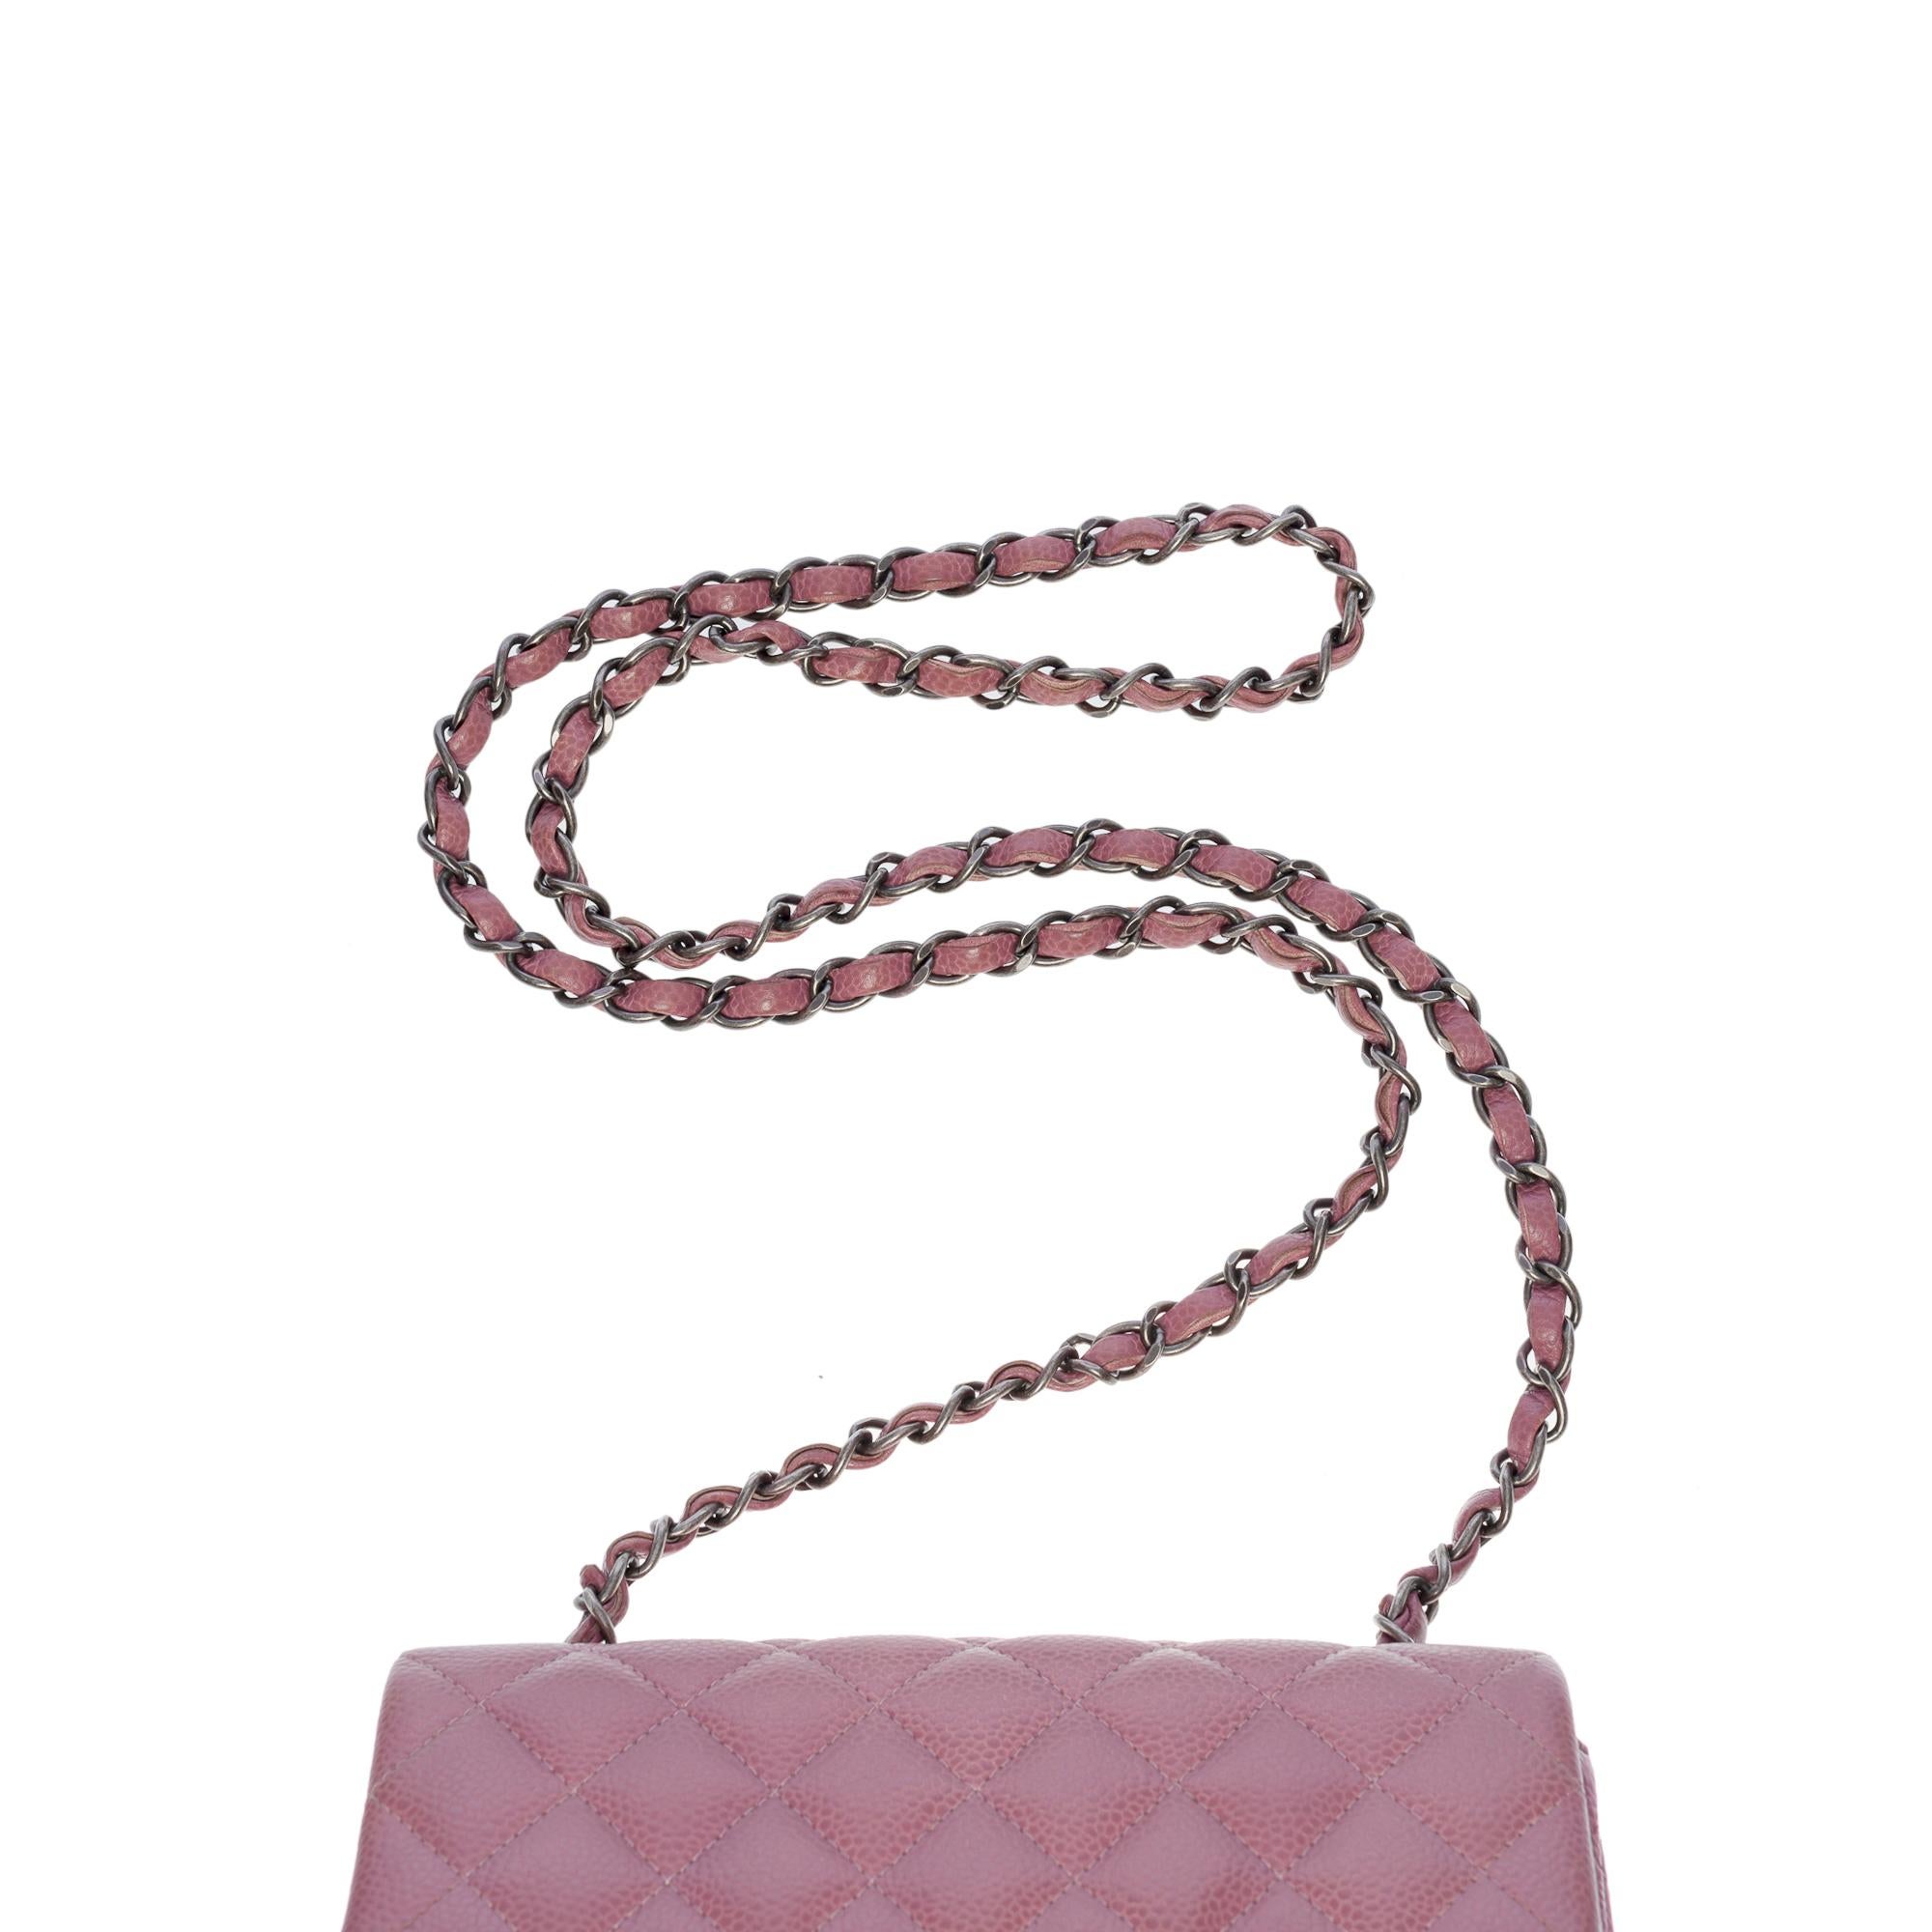 Chanel Mini Timeless Shoulder bag in Pink caviar quilted leather, SHW 3